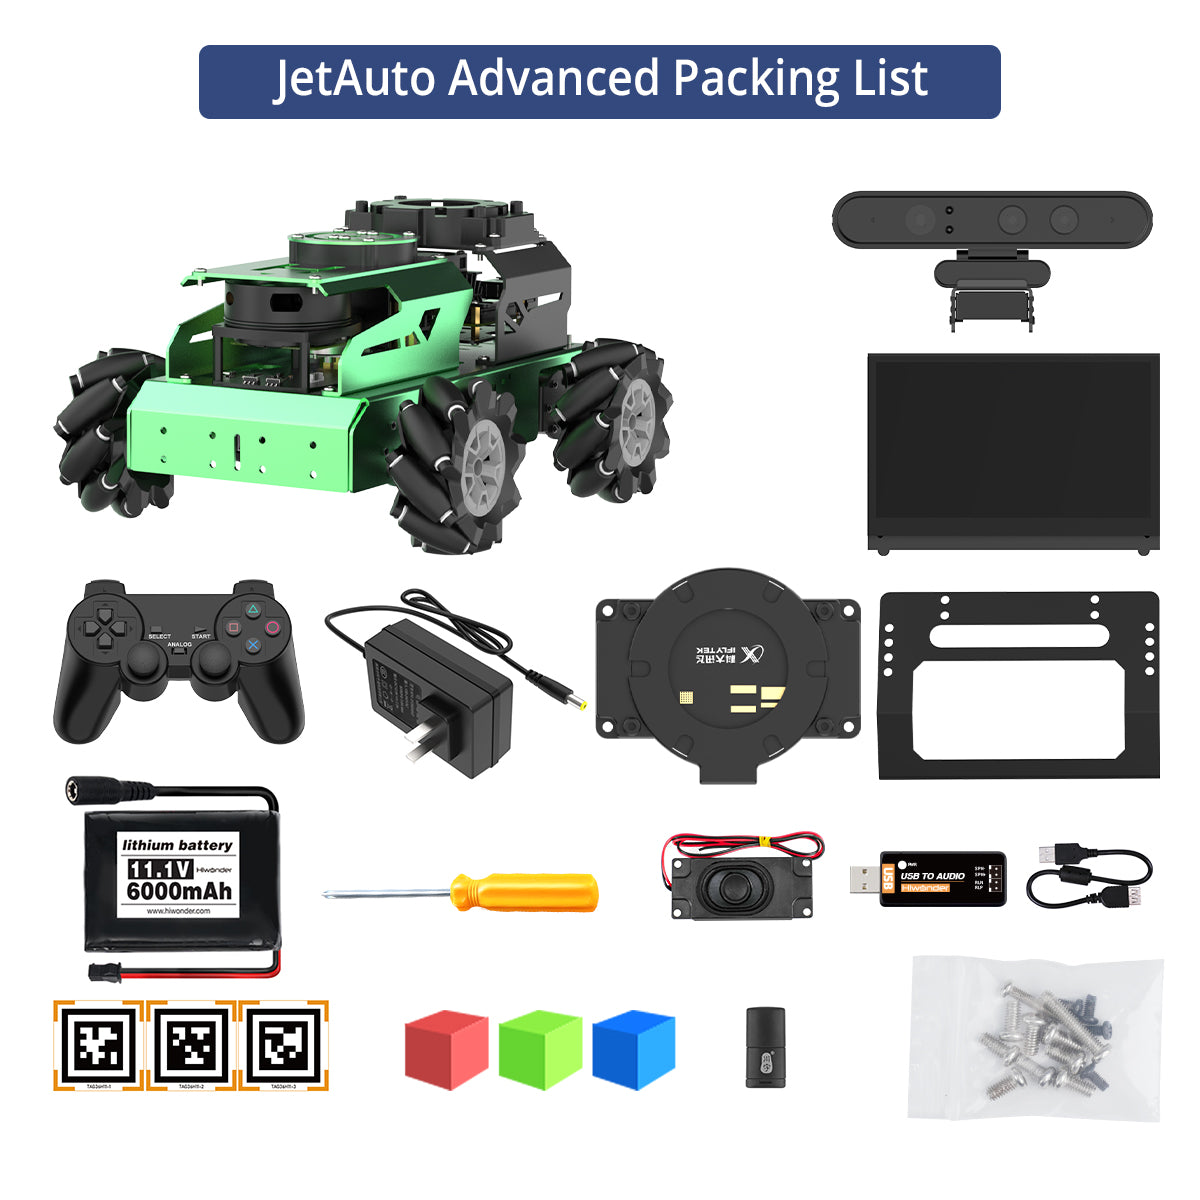 Hiwonder JetAuto ROS Robot Car Powered by Jetson Nano with Lidar Depth Camera Touch Screen, Support SLAM Mapping and Navigation